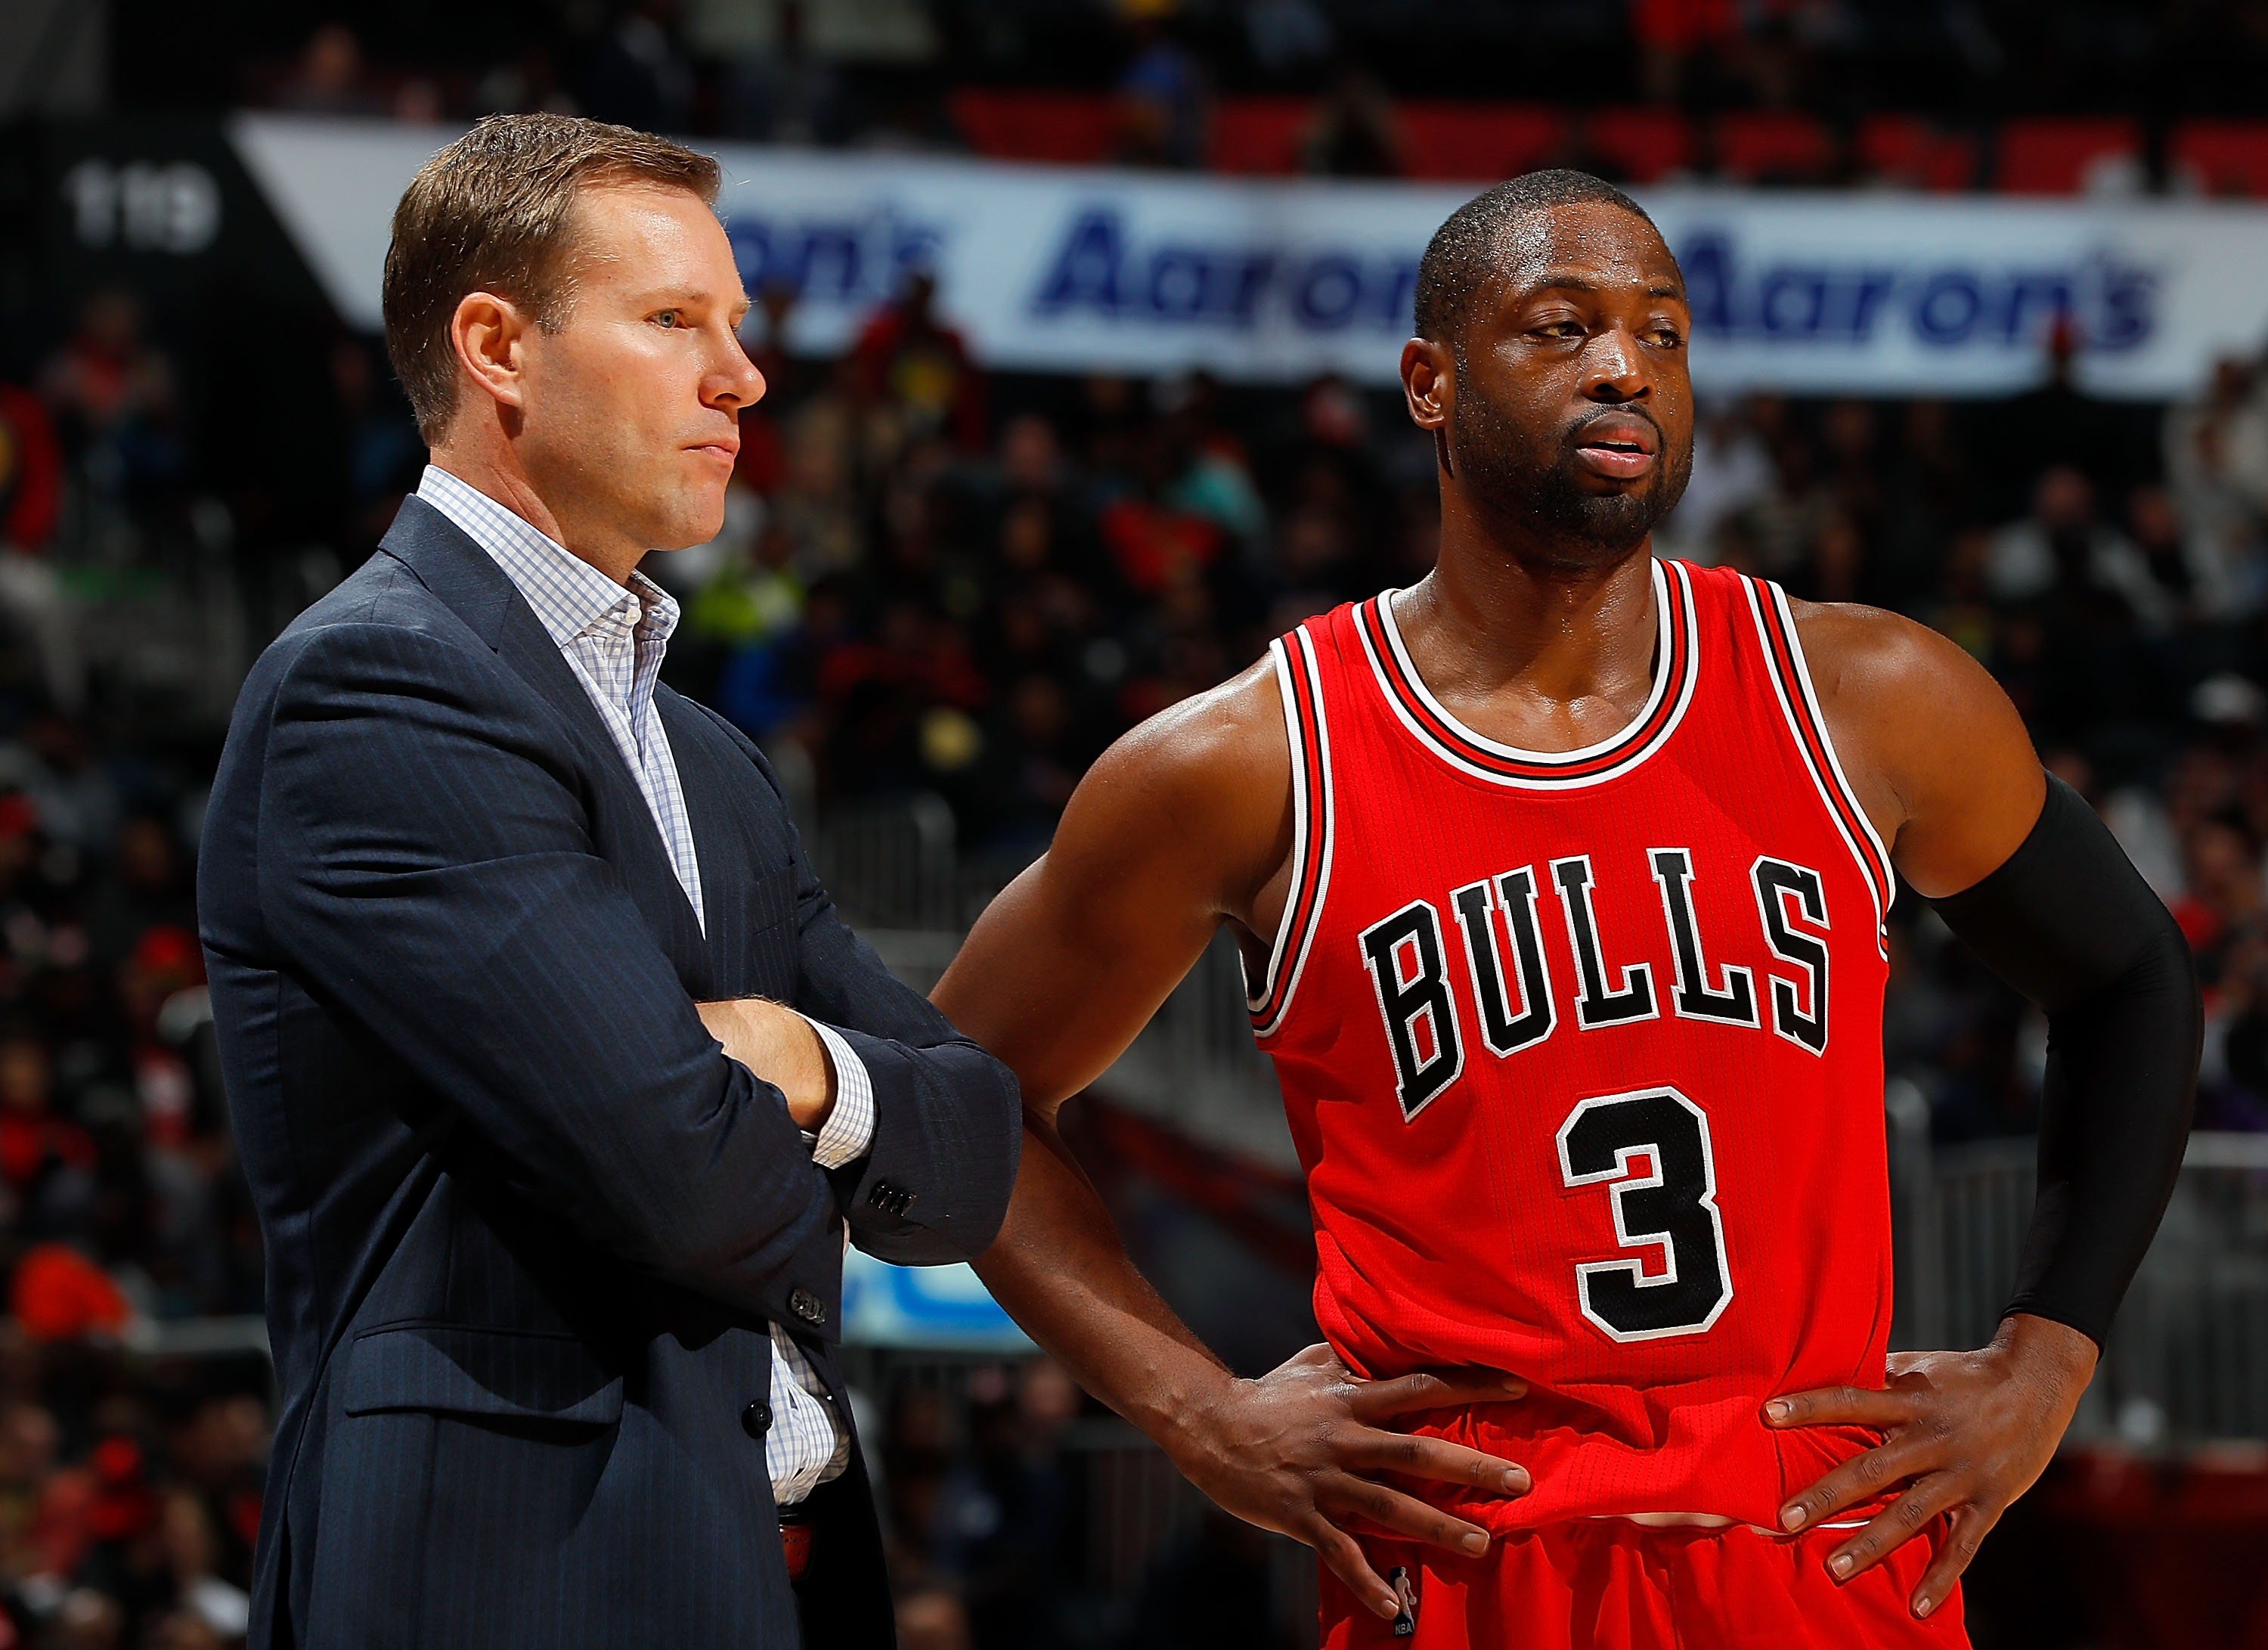 Dwyane Wade excited to join hometown Bulls